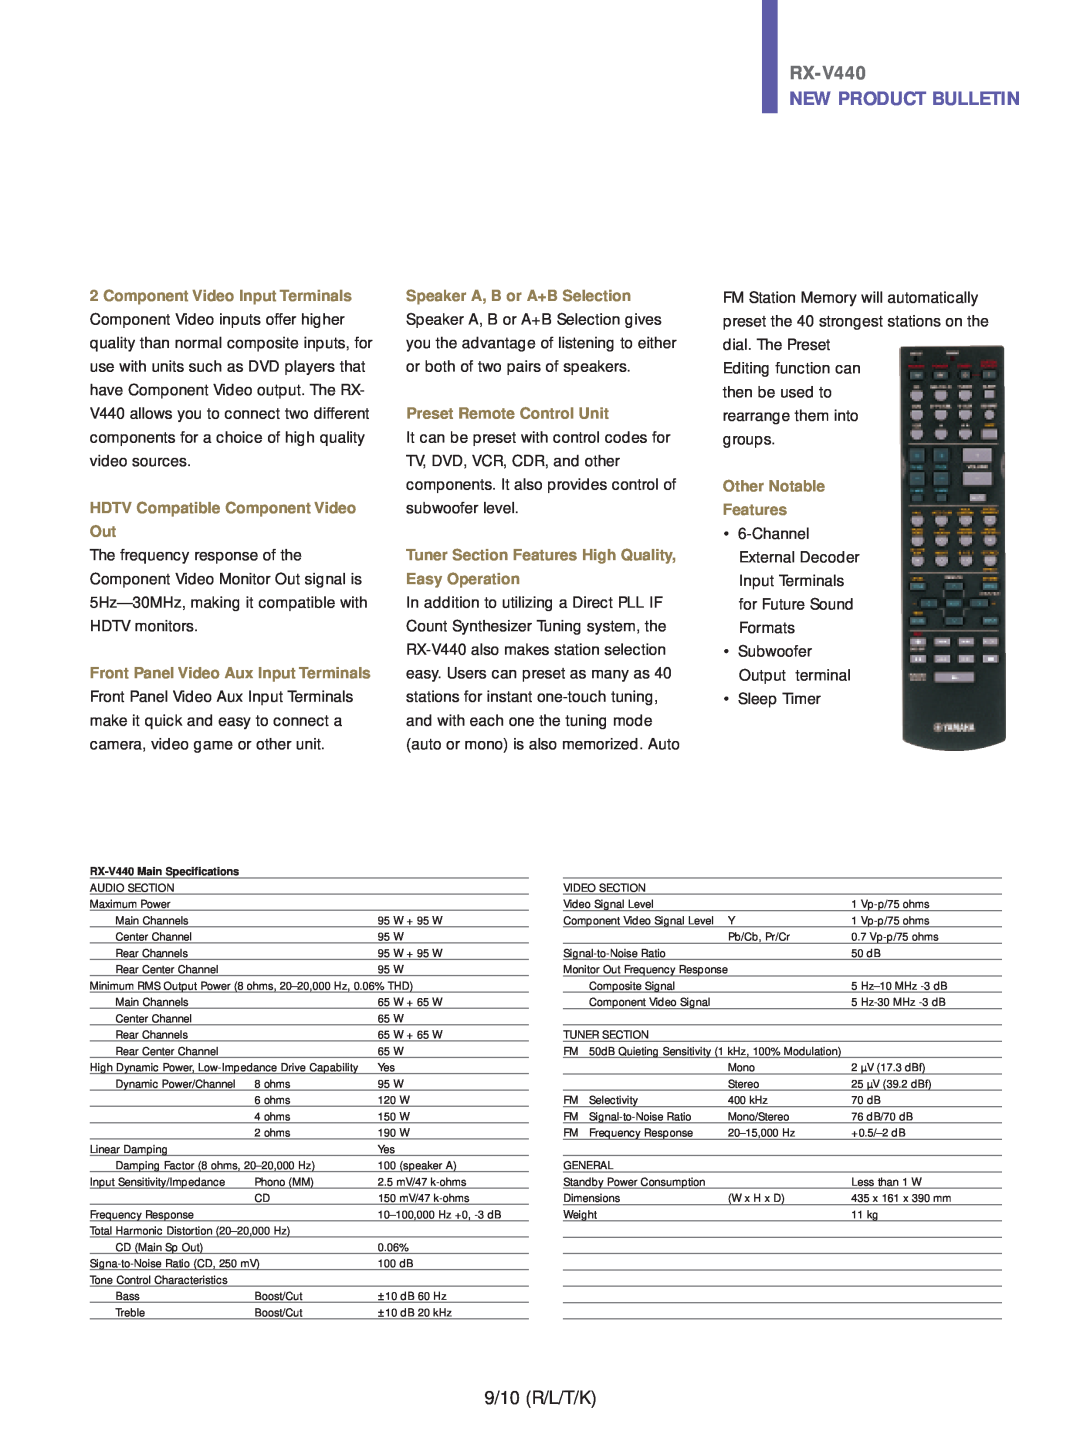 Yamaha RX-V440 New Product Bulletin, Component Video Input Terminals, HDTV Compatible Component Video Out, Easy Operation 